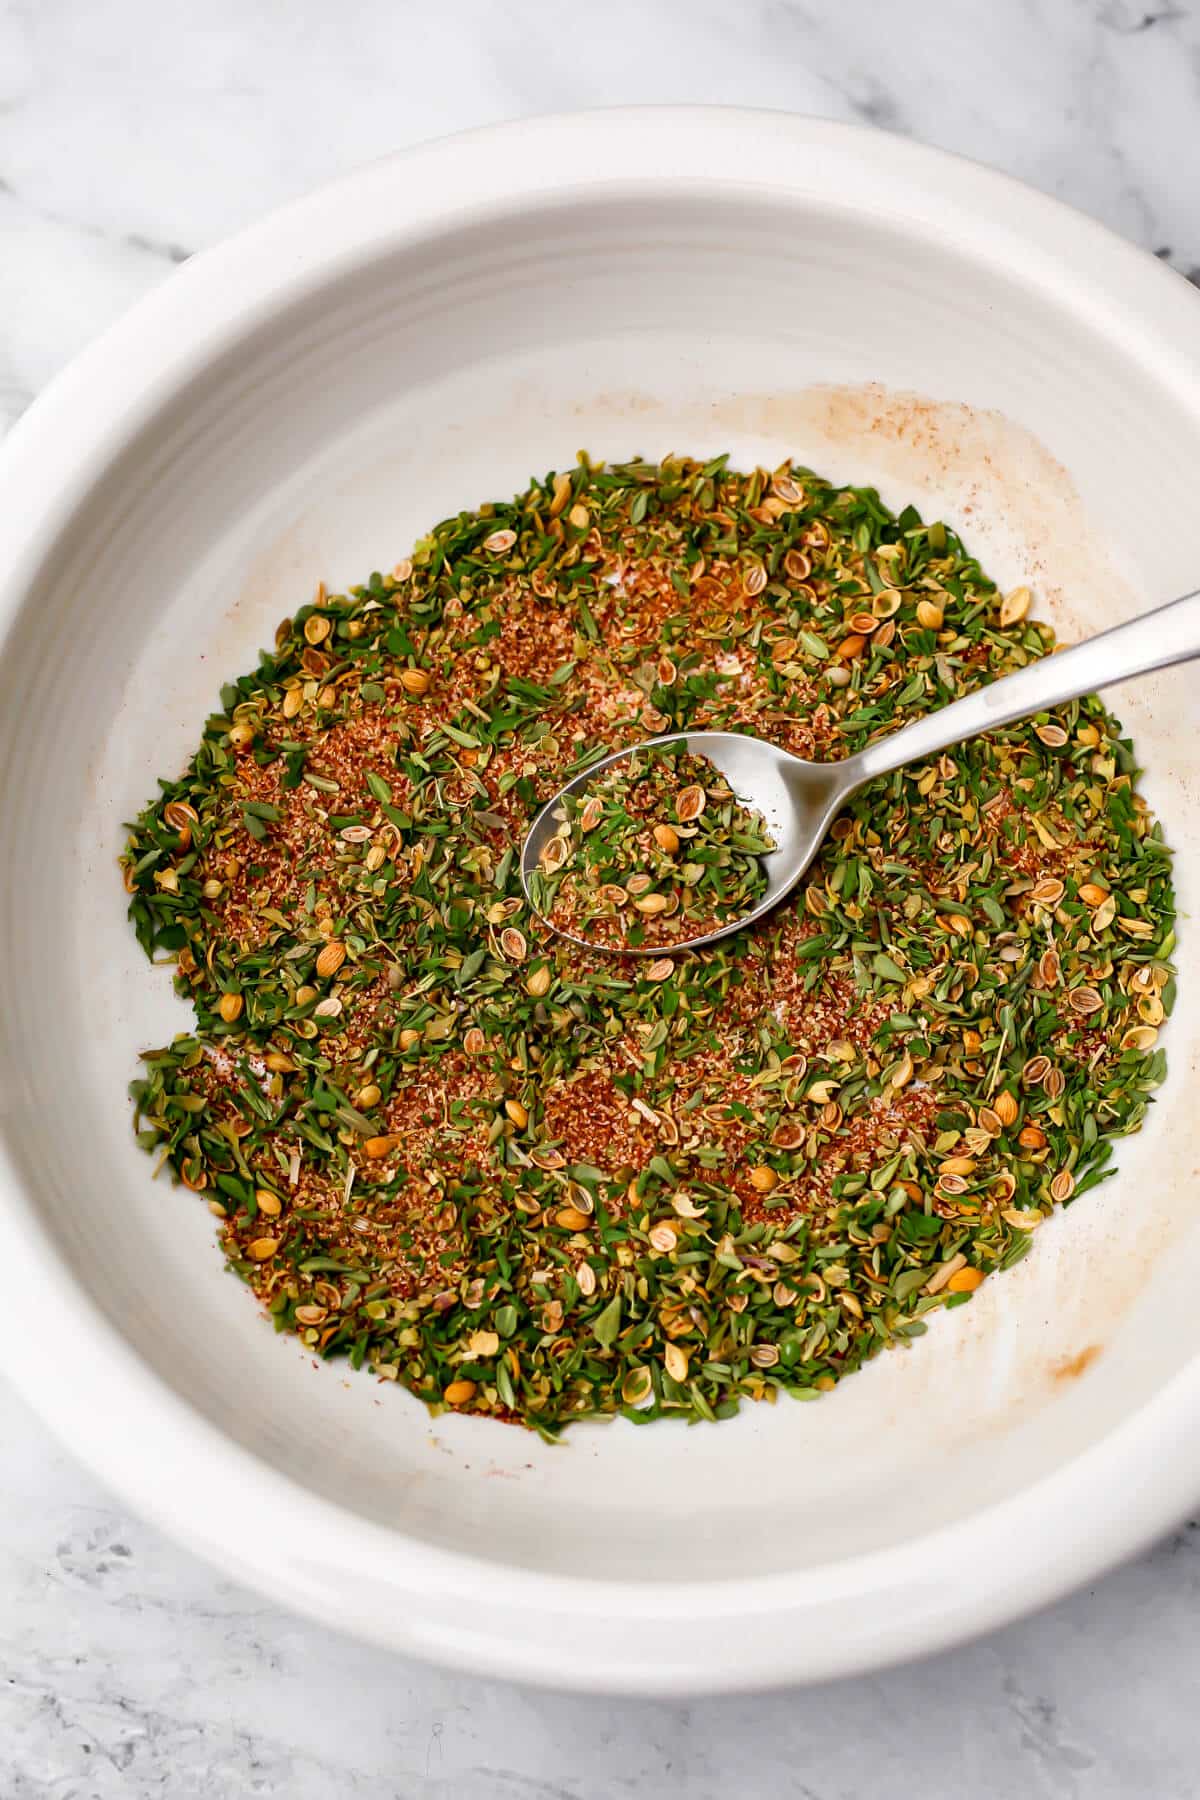 Gyro seasonings mixed and ready to sprinkle on meats or faux meats to make gyros.